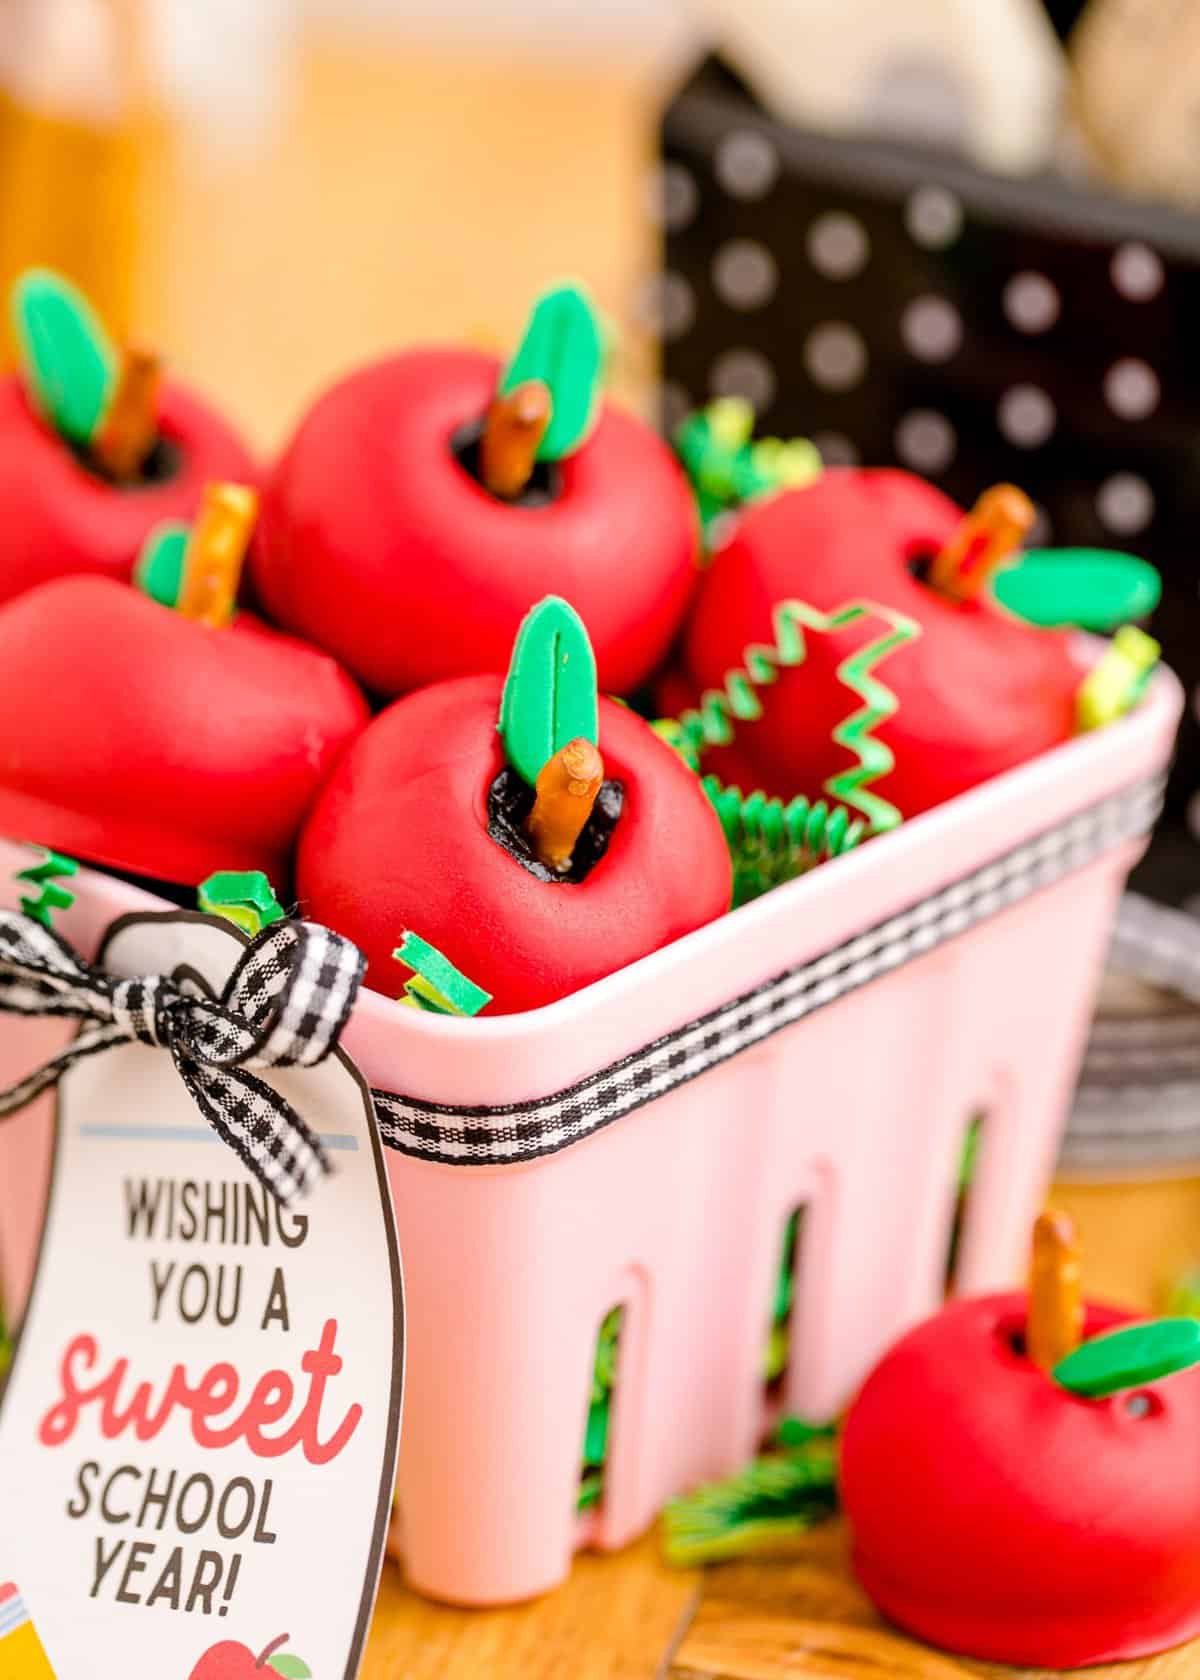 Apple oreo balls stacked in a cute pink fruit basket.